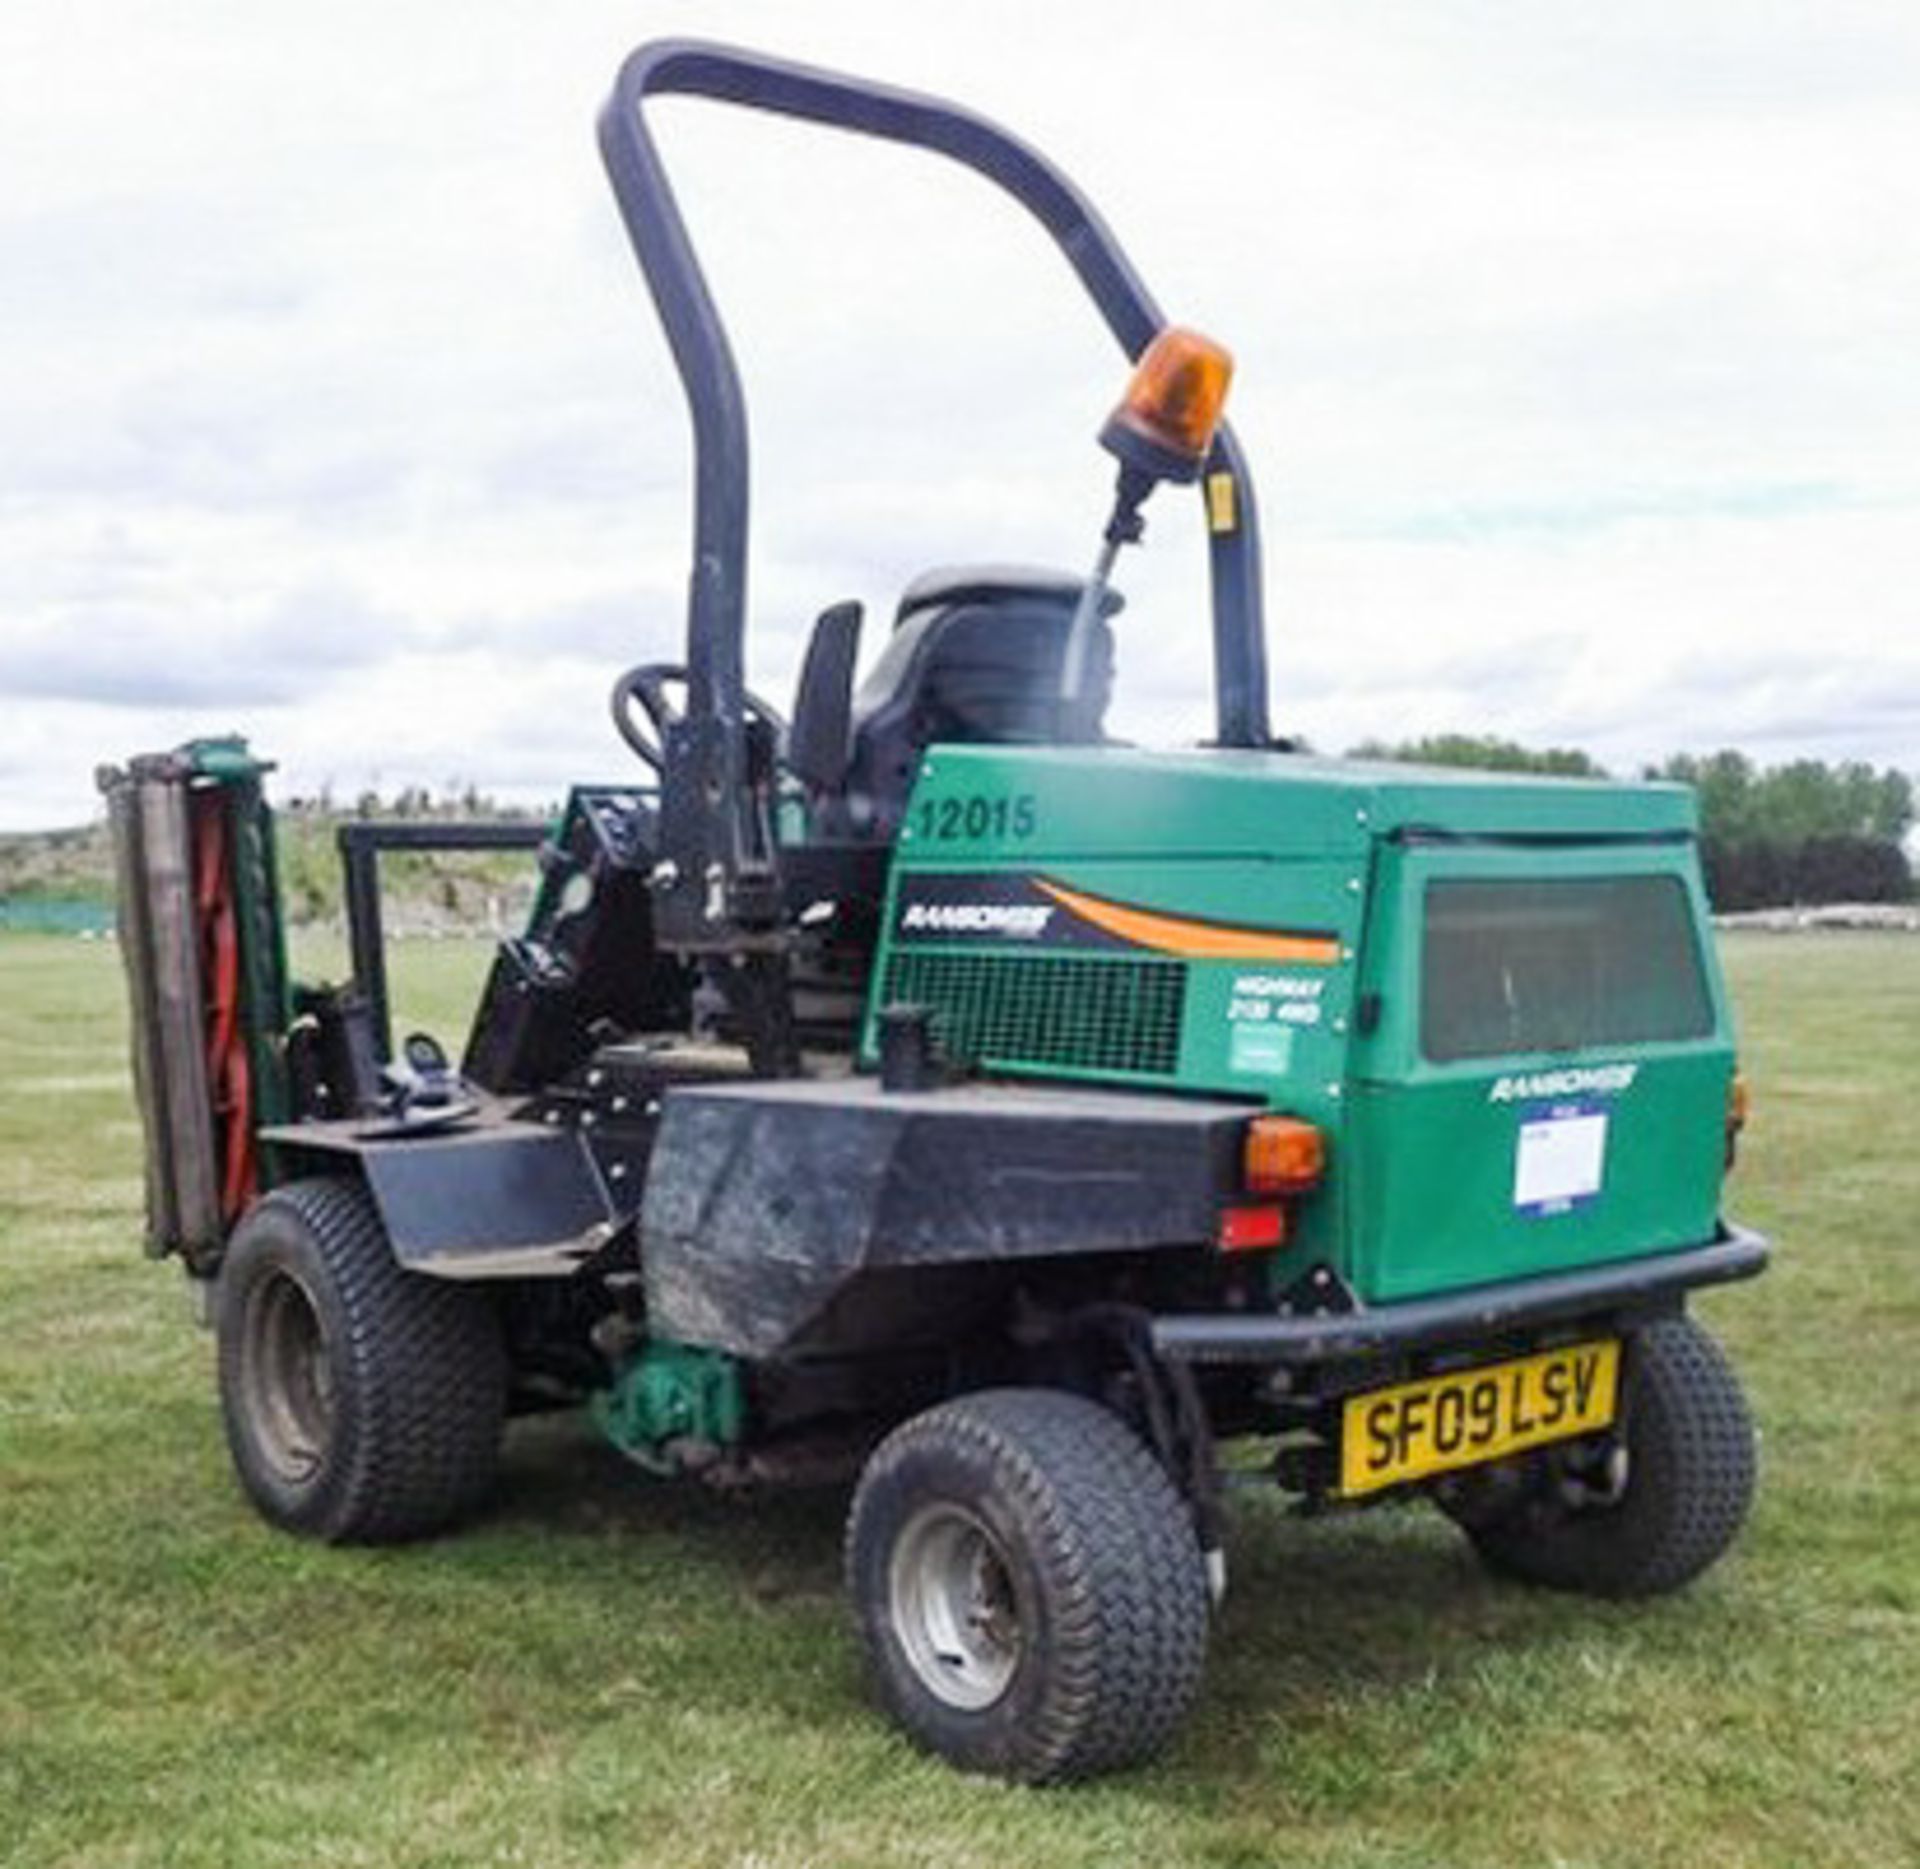 2009 RAMSOMES HIGHWAY 2130 4WD TRIPLE MOWER, REG - SF09LSV, CHASSIS - CU0000948, 2639HRS (NOT VERIFI - Image 5 of 21